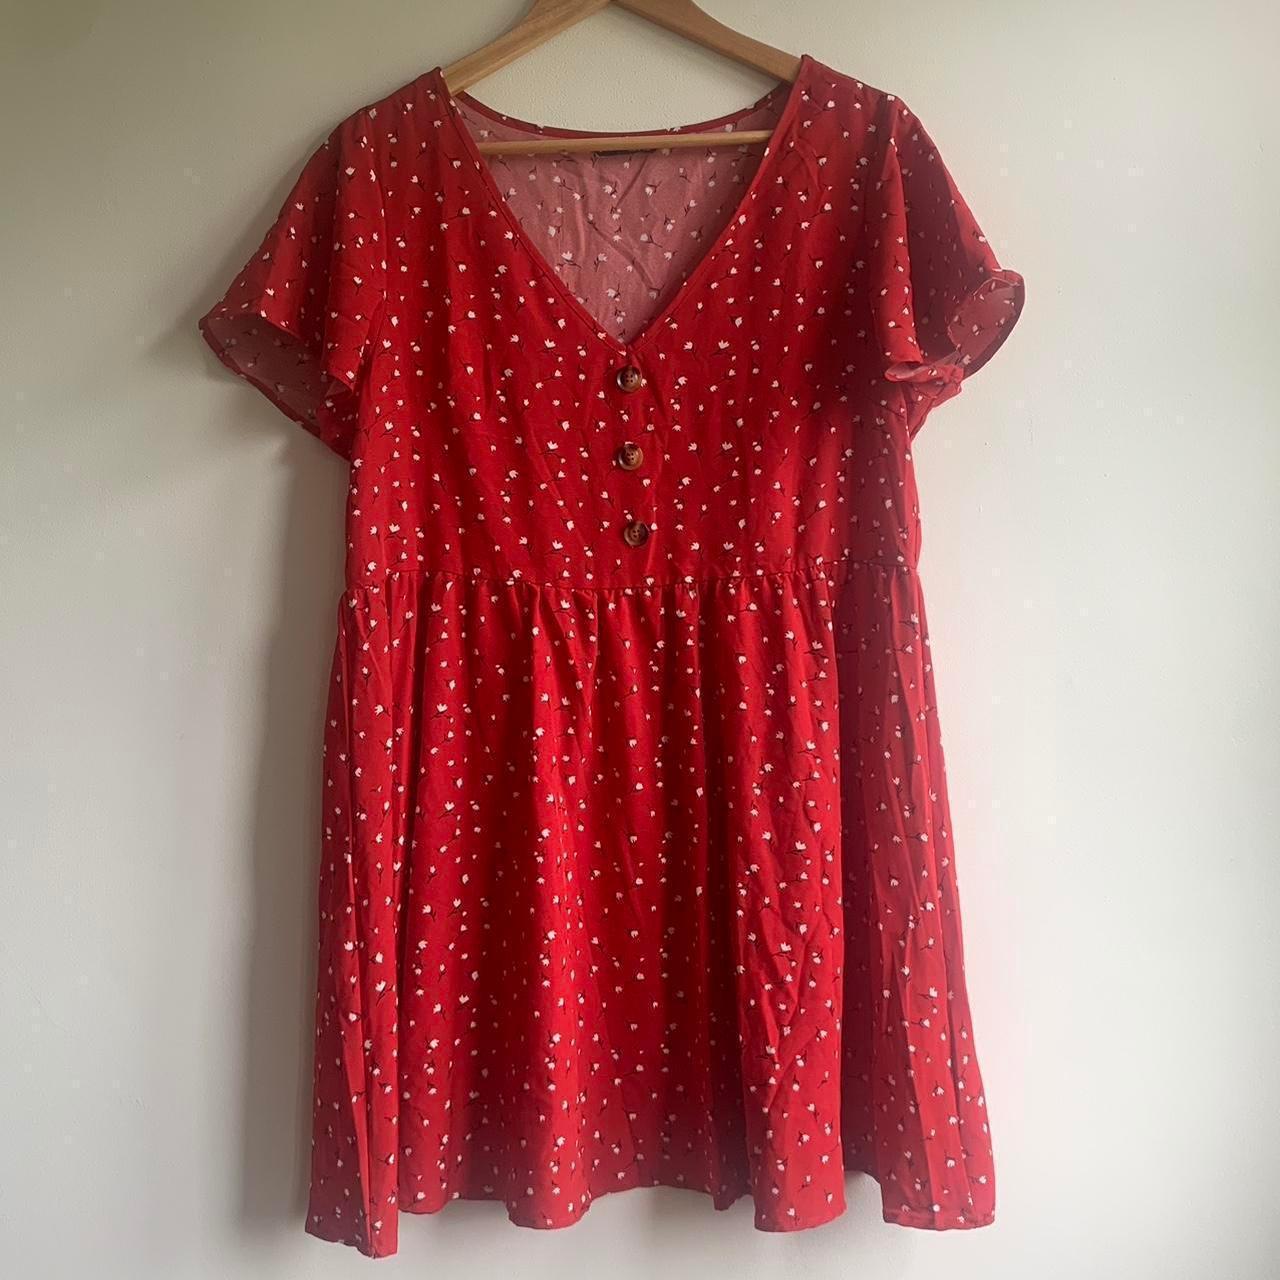 Floral print dress by shein Red white FREE UK... - Depop